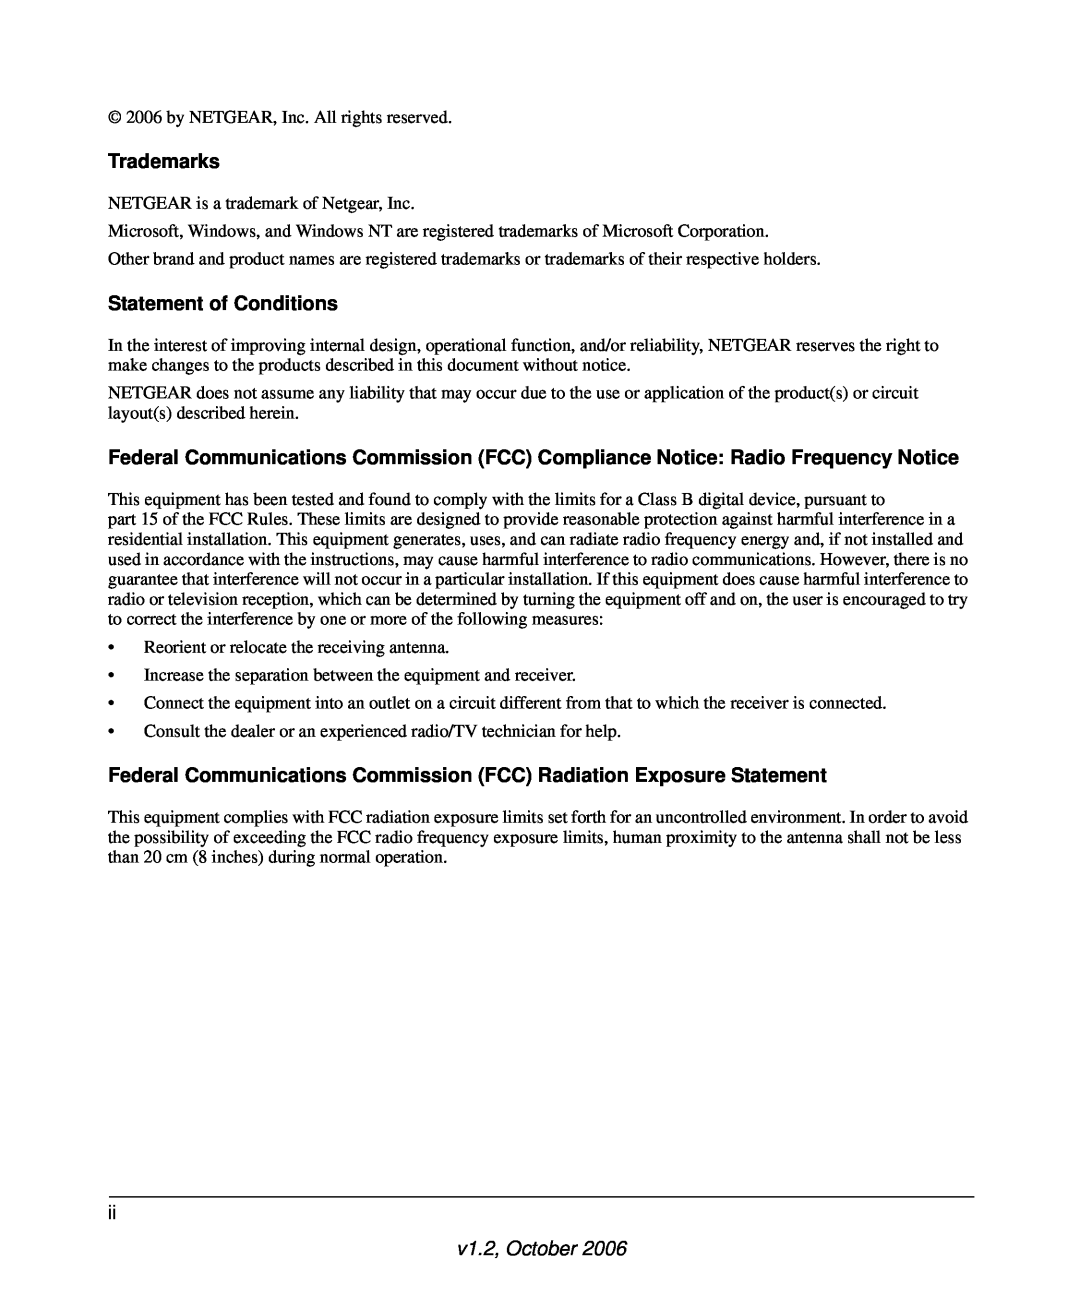 NETGEAR DG834G Trademarks, Statement of Conditions, Federal Communications Commission FCC Radiation Exposure Statement 